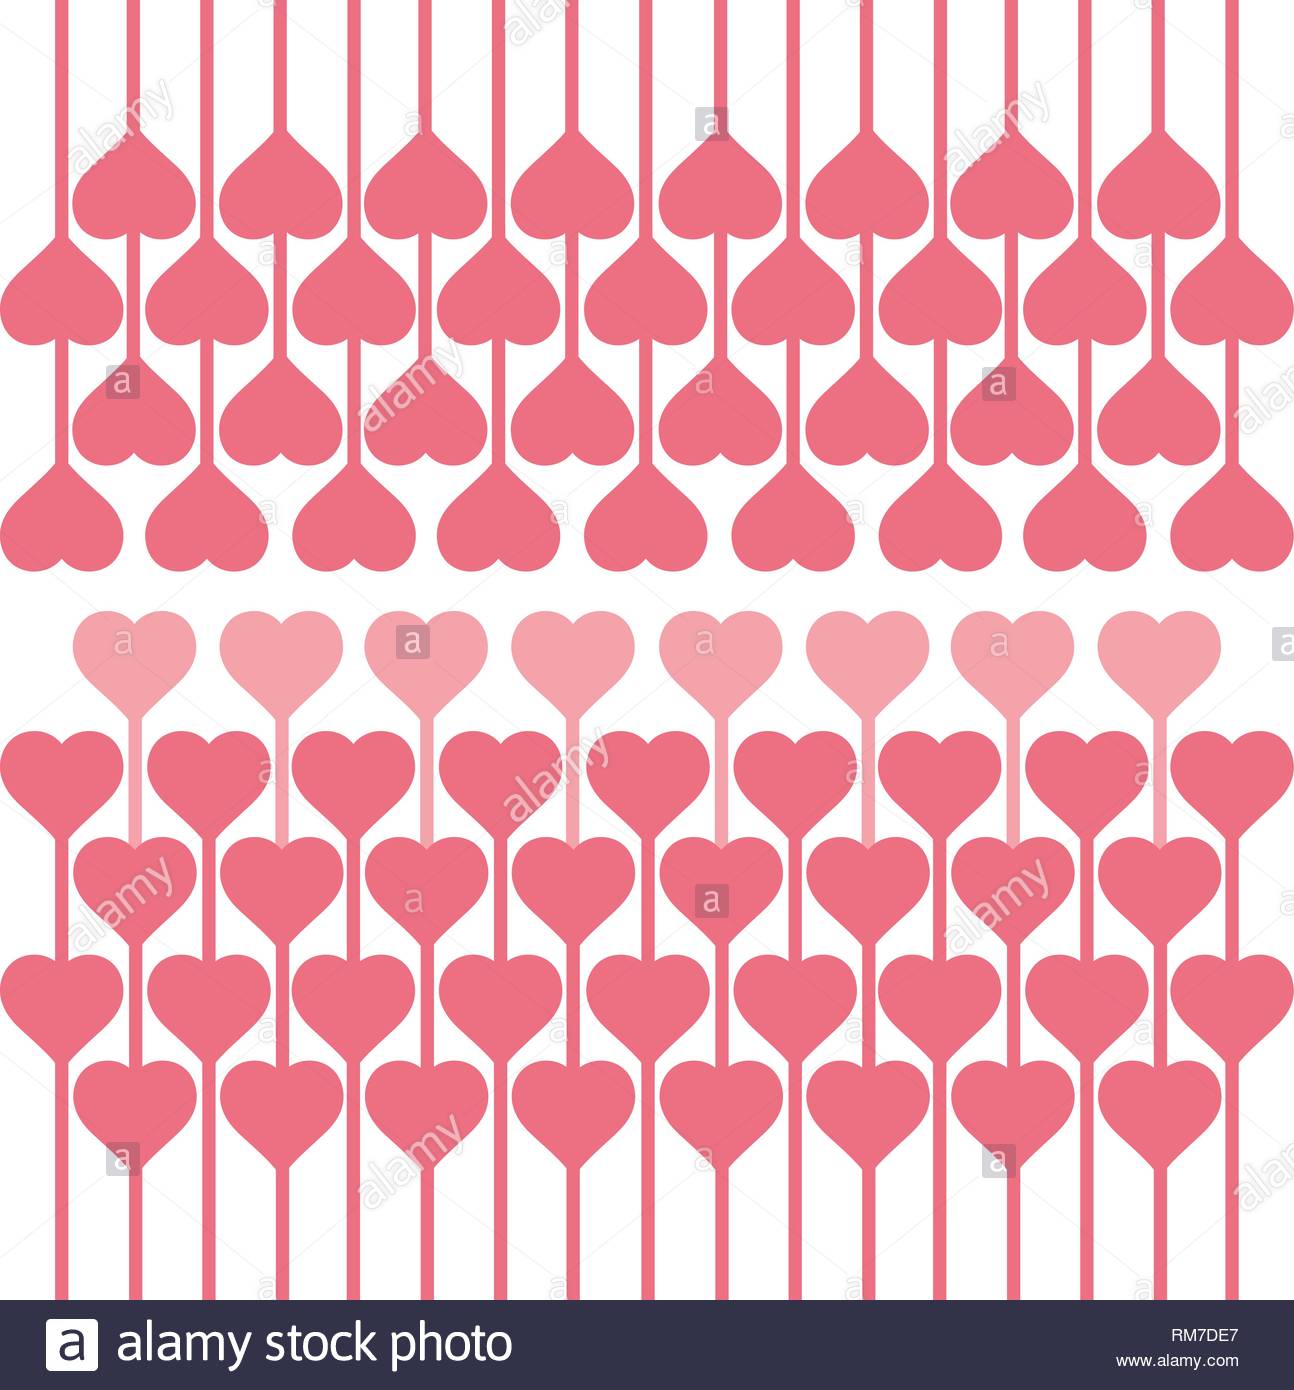 Pink Hearts Pattern Symbols Background Valentine S Day And